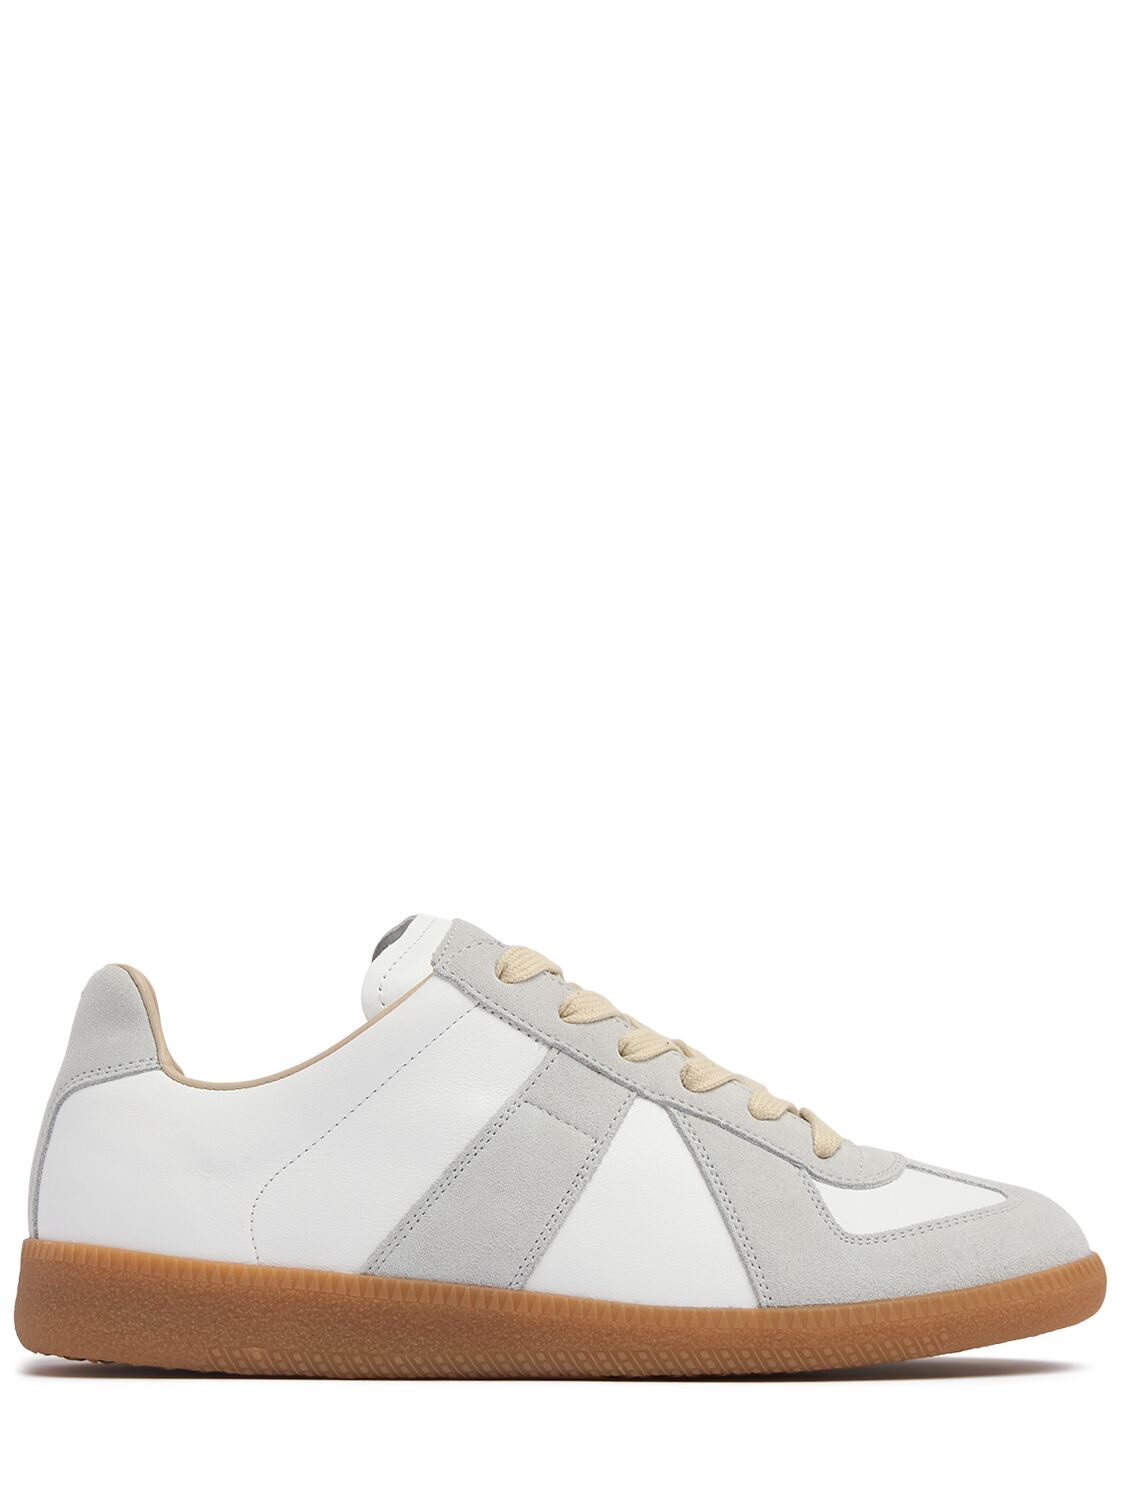 Maison Margiela 20mm Replica Leather & Suede Sneakers In Off White